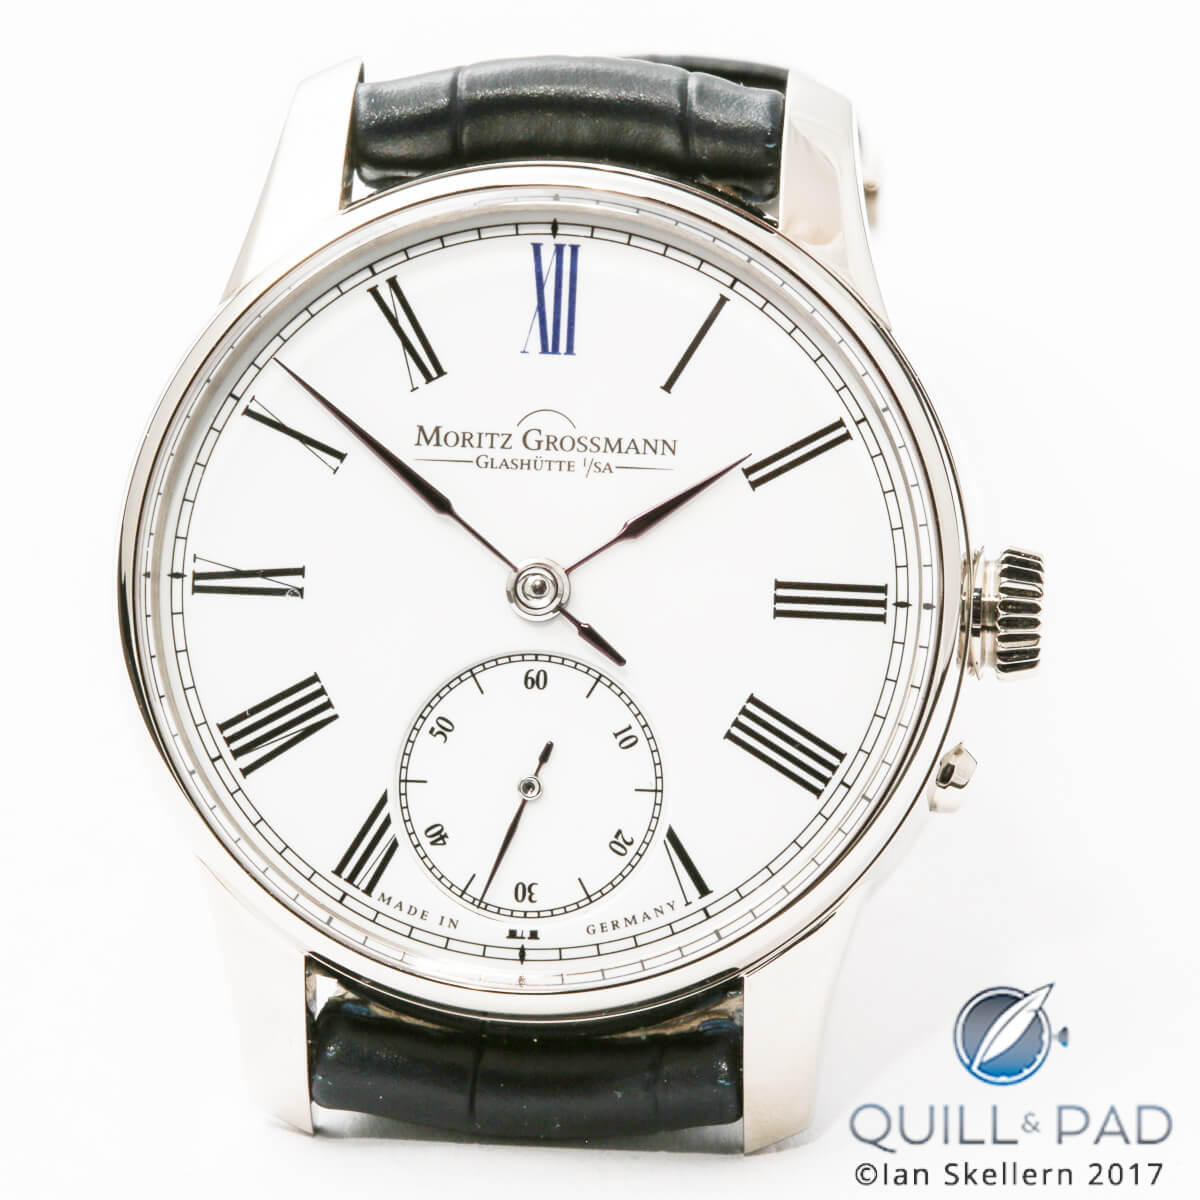 New at Baselworld 2017 by Moritz Grossmann: a 41 mm Atum model with a sumptuous oven-fired (grand feu) enamel dial